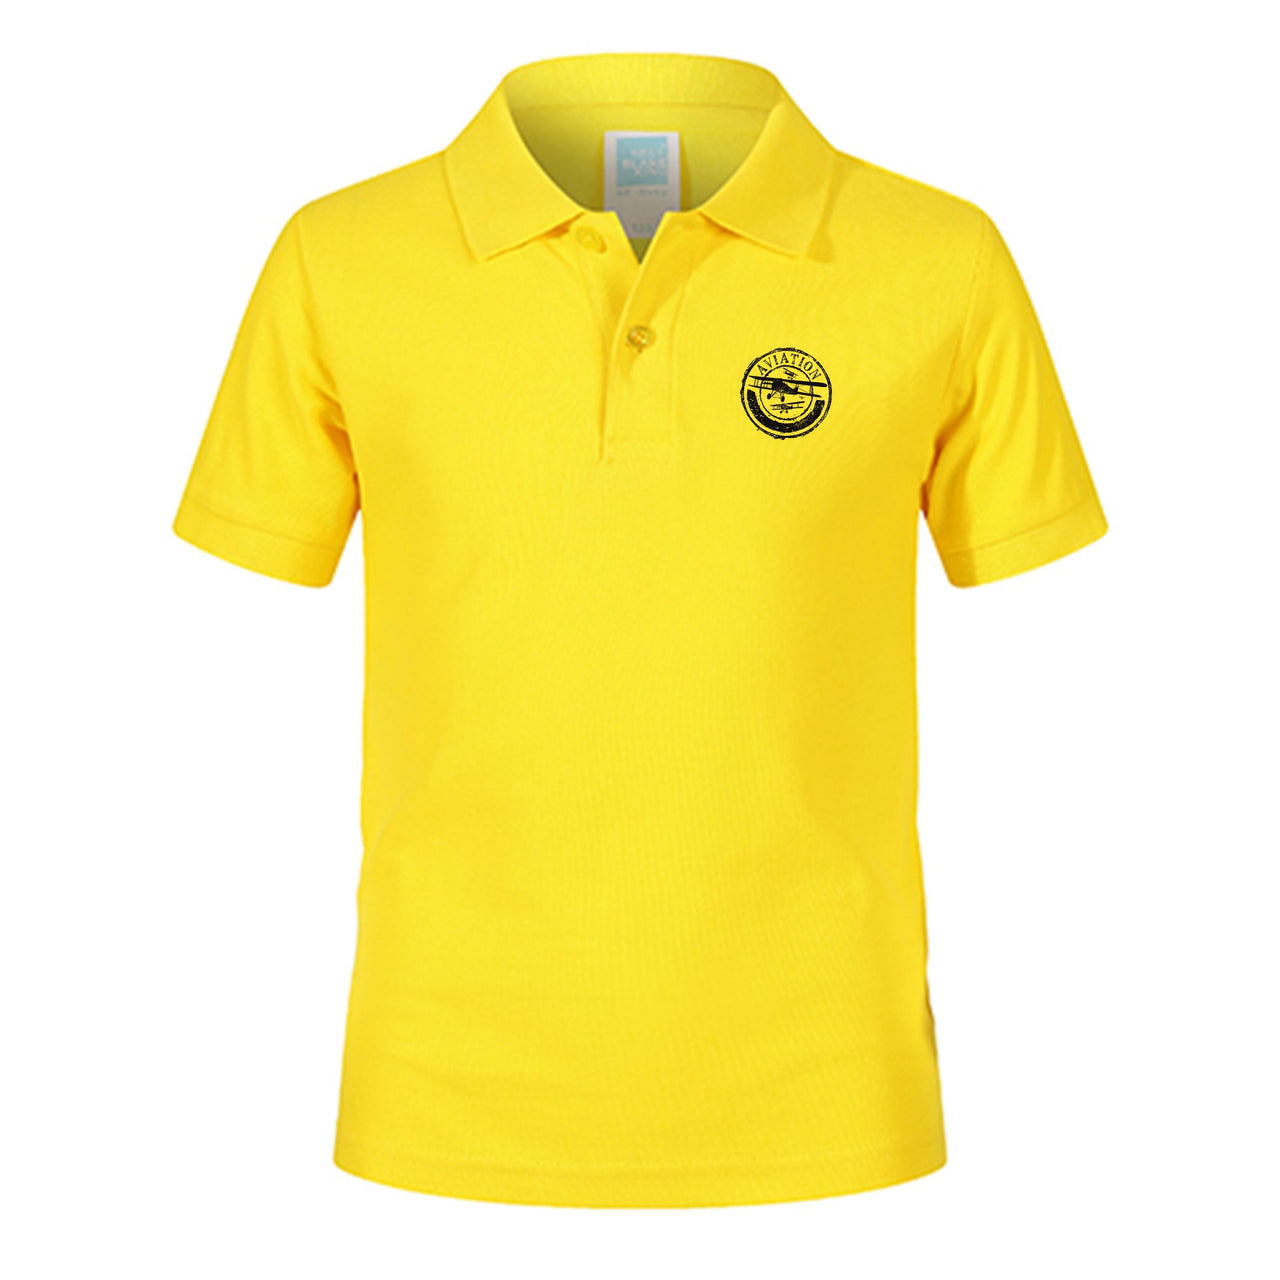 Aviation Lovers Designed Children Polo T-Shirts